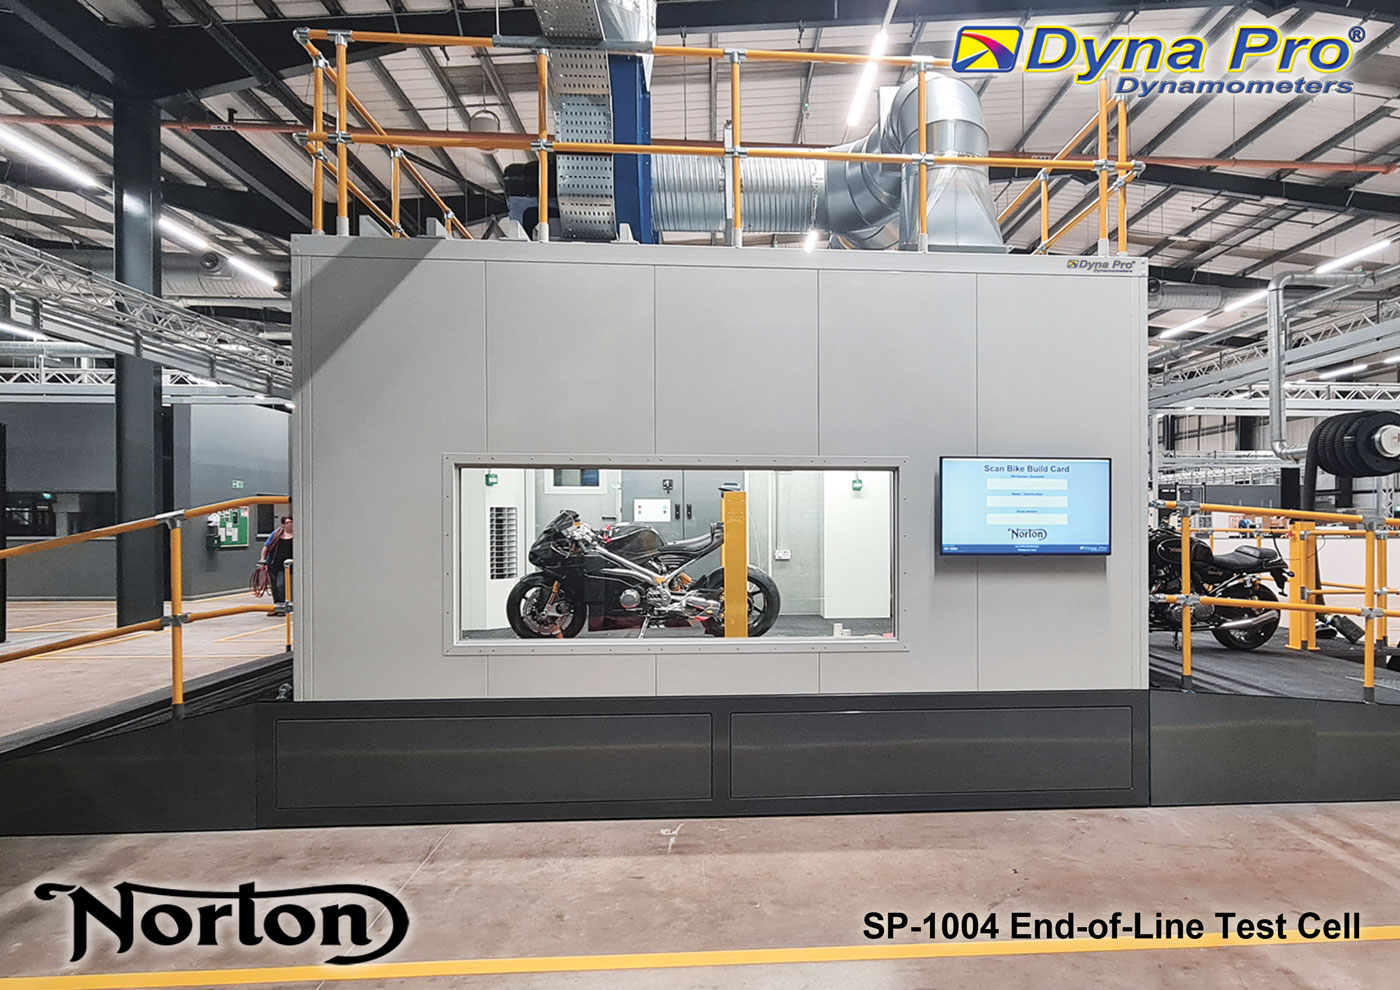 Norton Motorcycles End-of-Line Test Cell manufactured by Dyna Pro Dynamometer